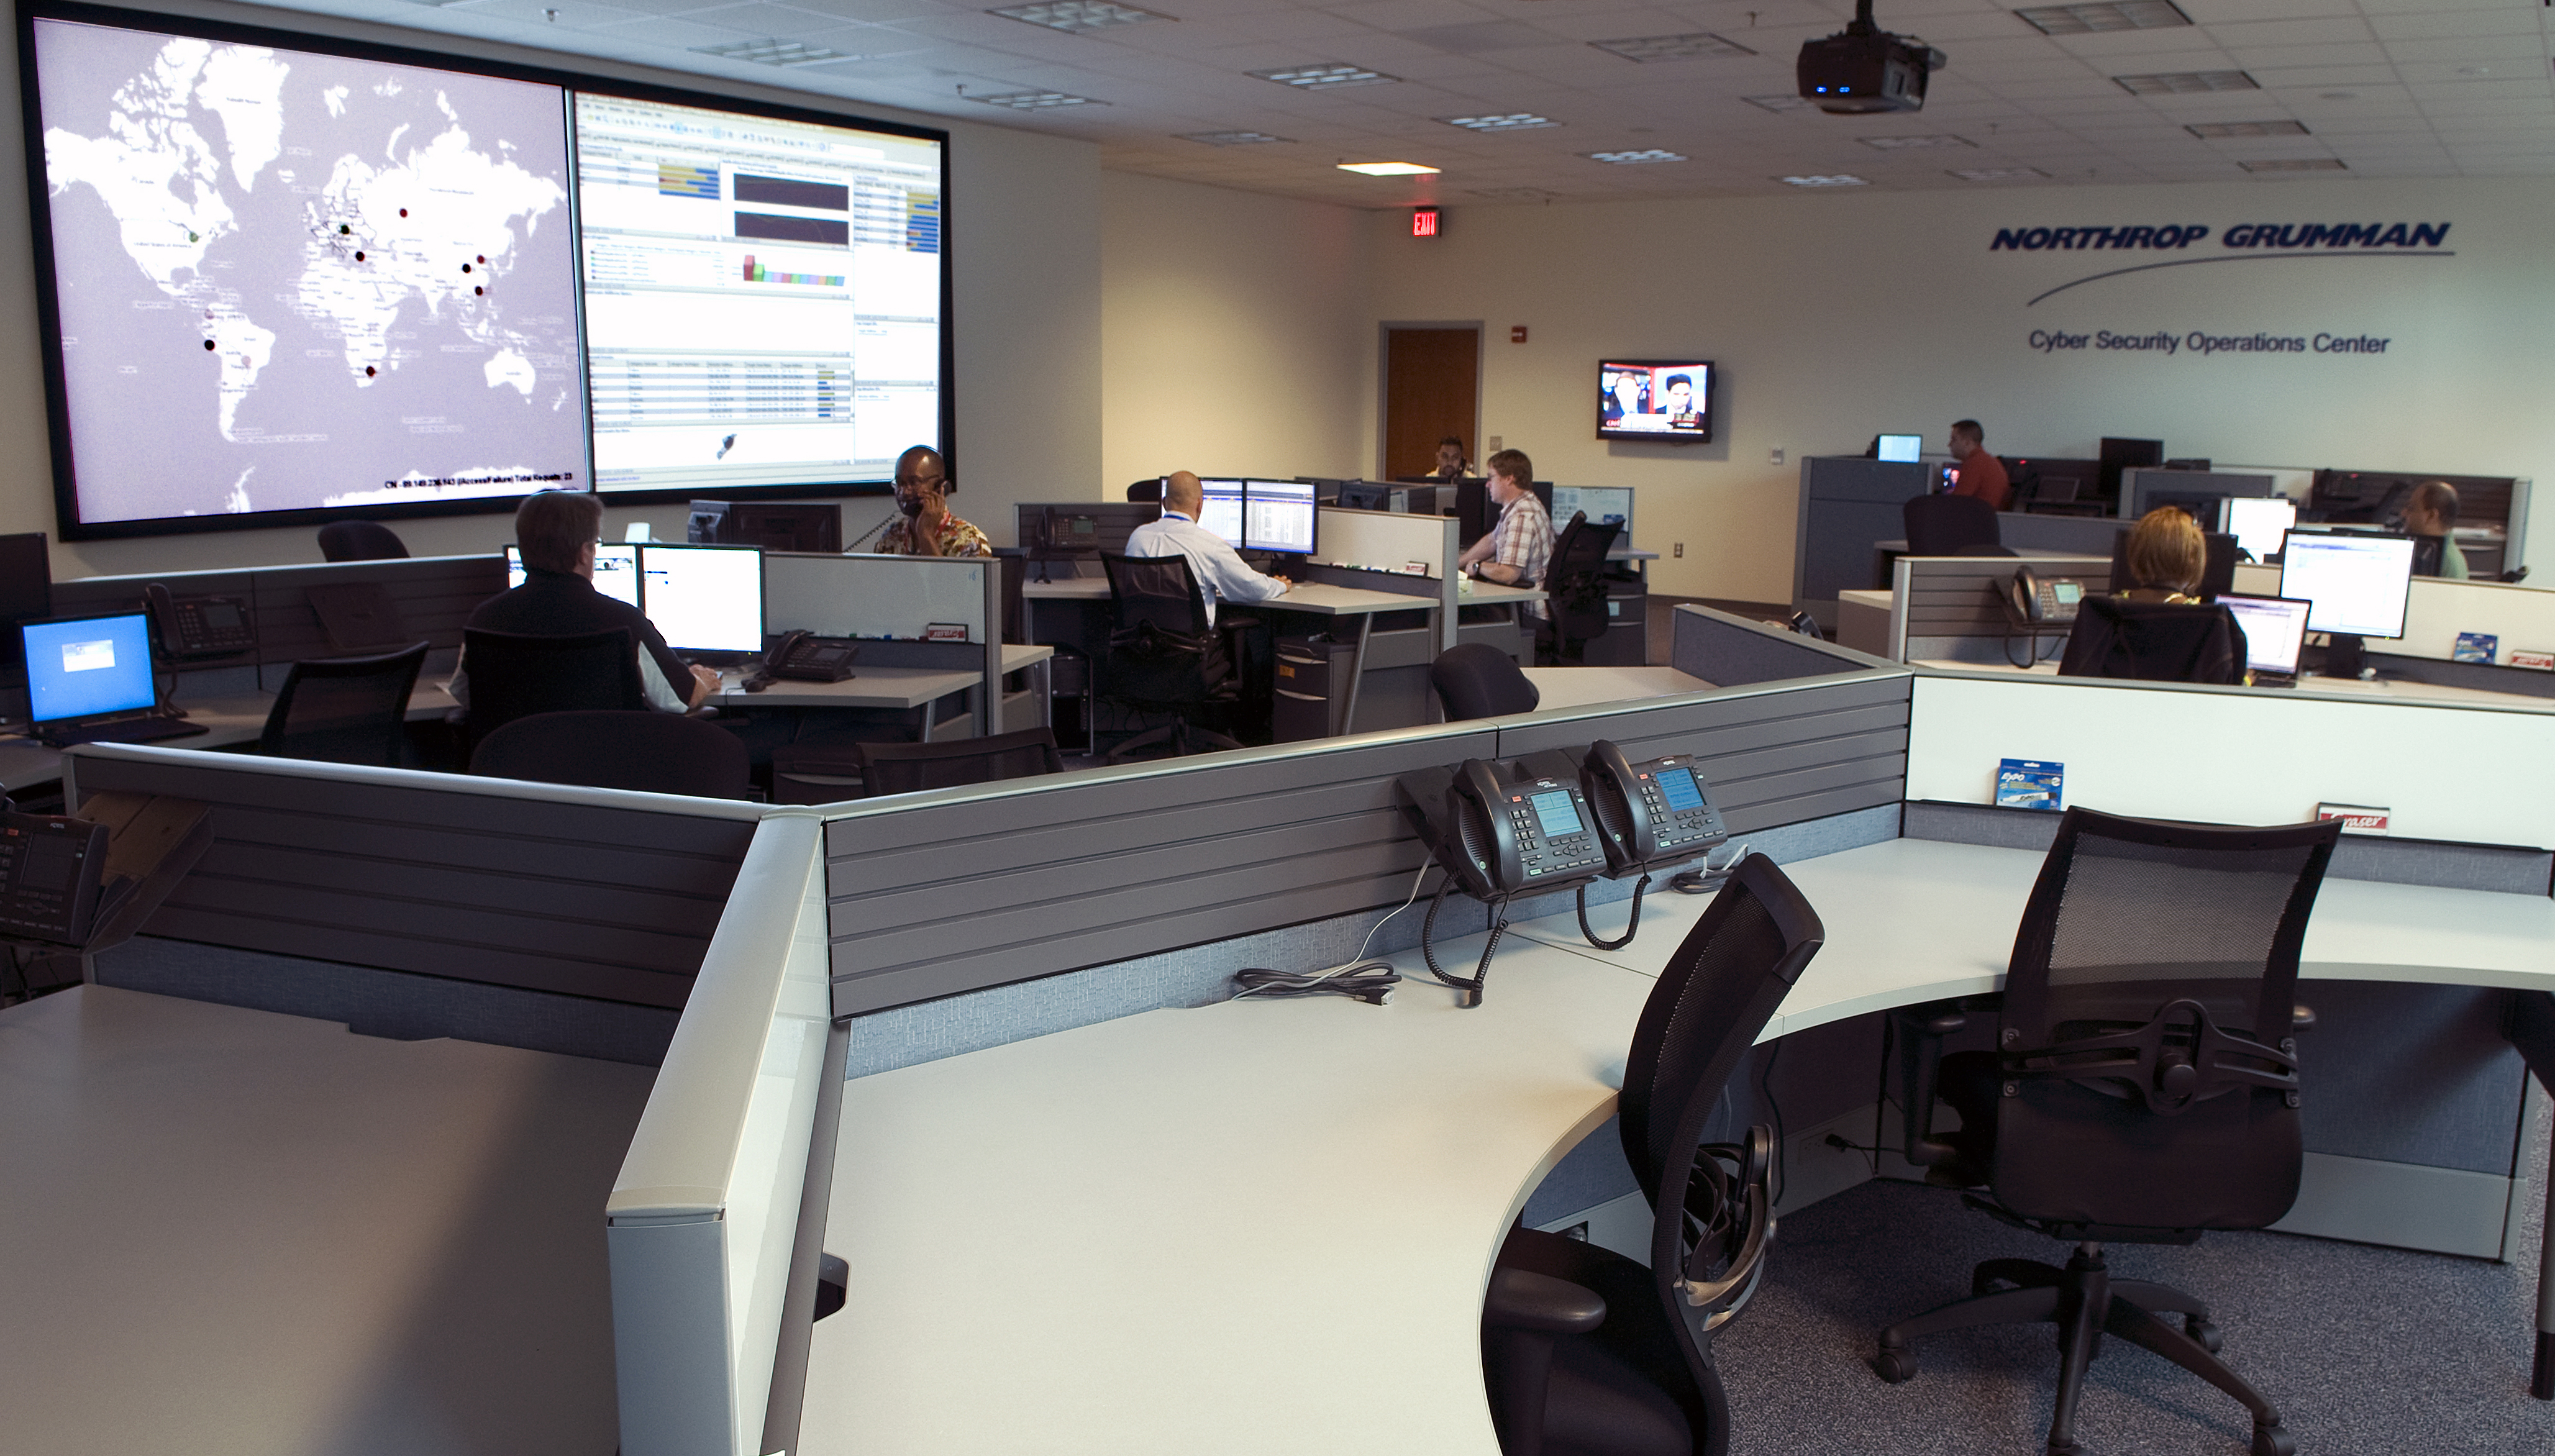 Cyber Security Operations Center